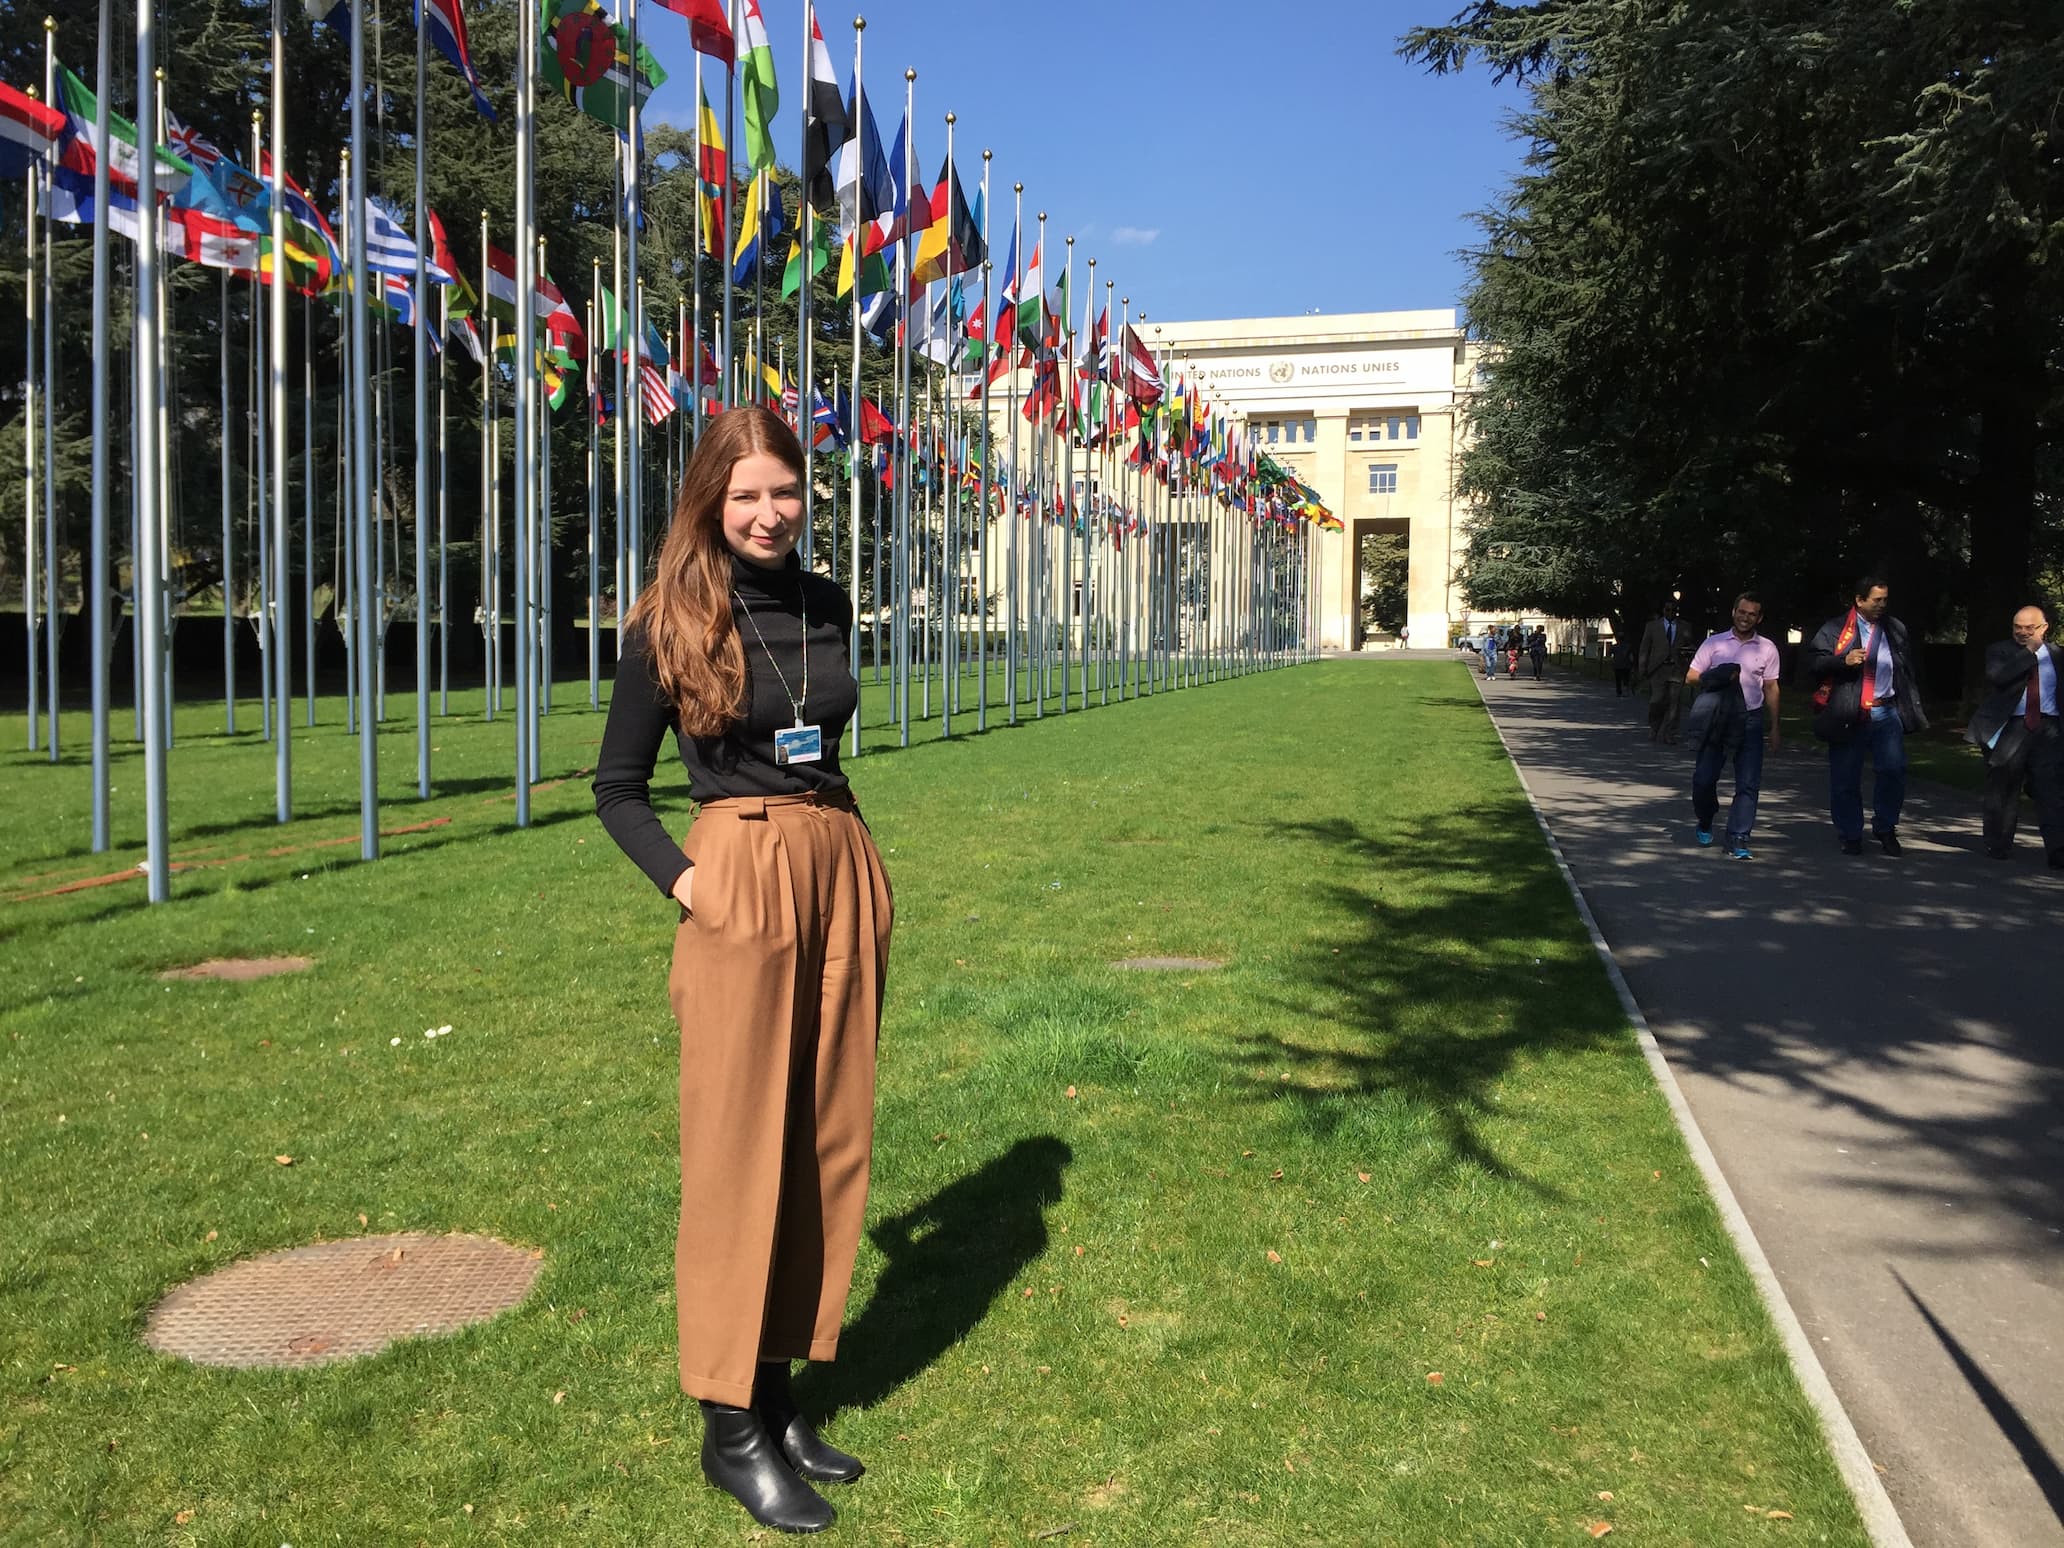 During 12 Catherine Craven spent a month at the United Nations Office at Geneva (UNOG) for the 34th UN Human Rights Council session. Credit: Catherine Craven